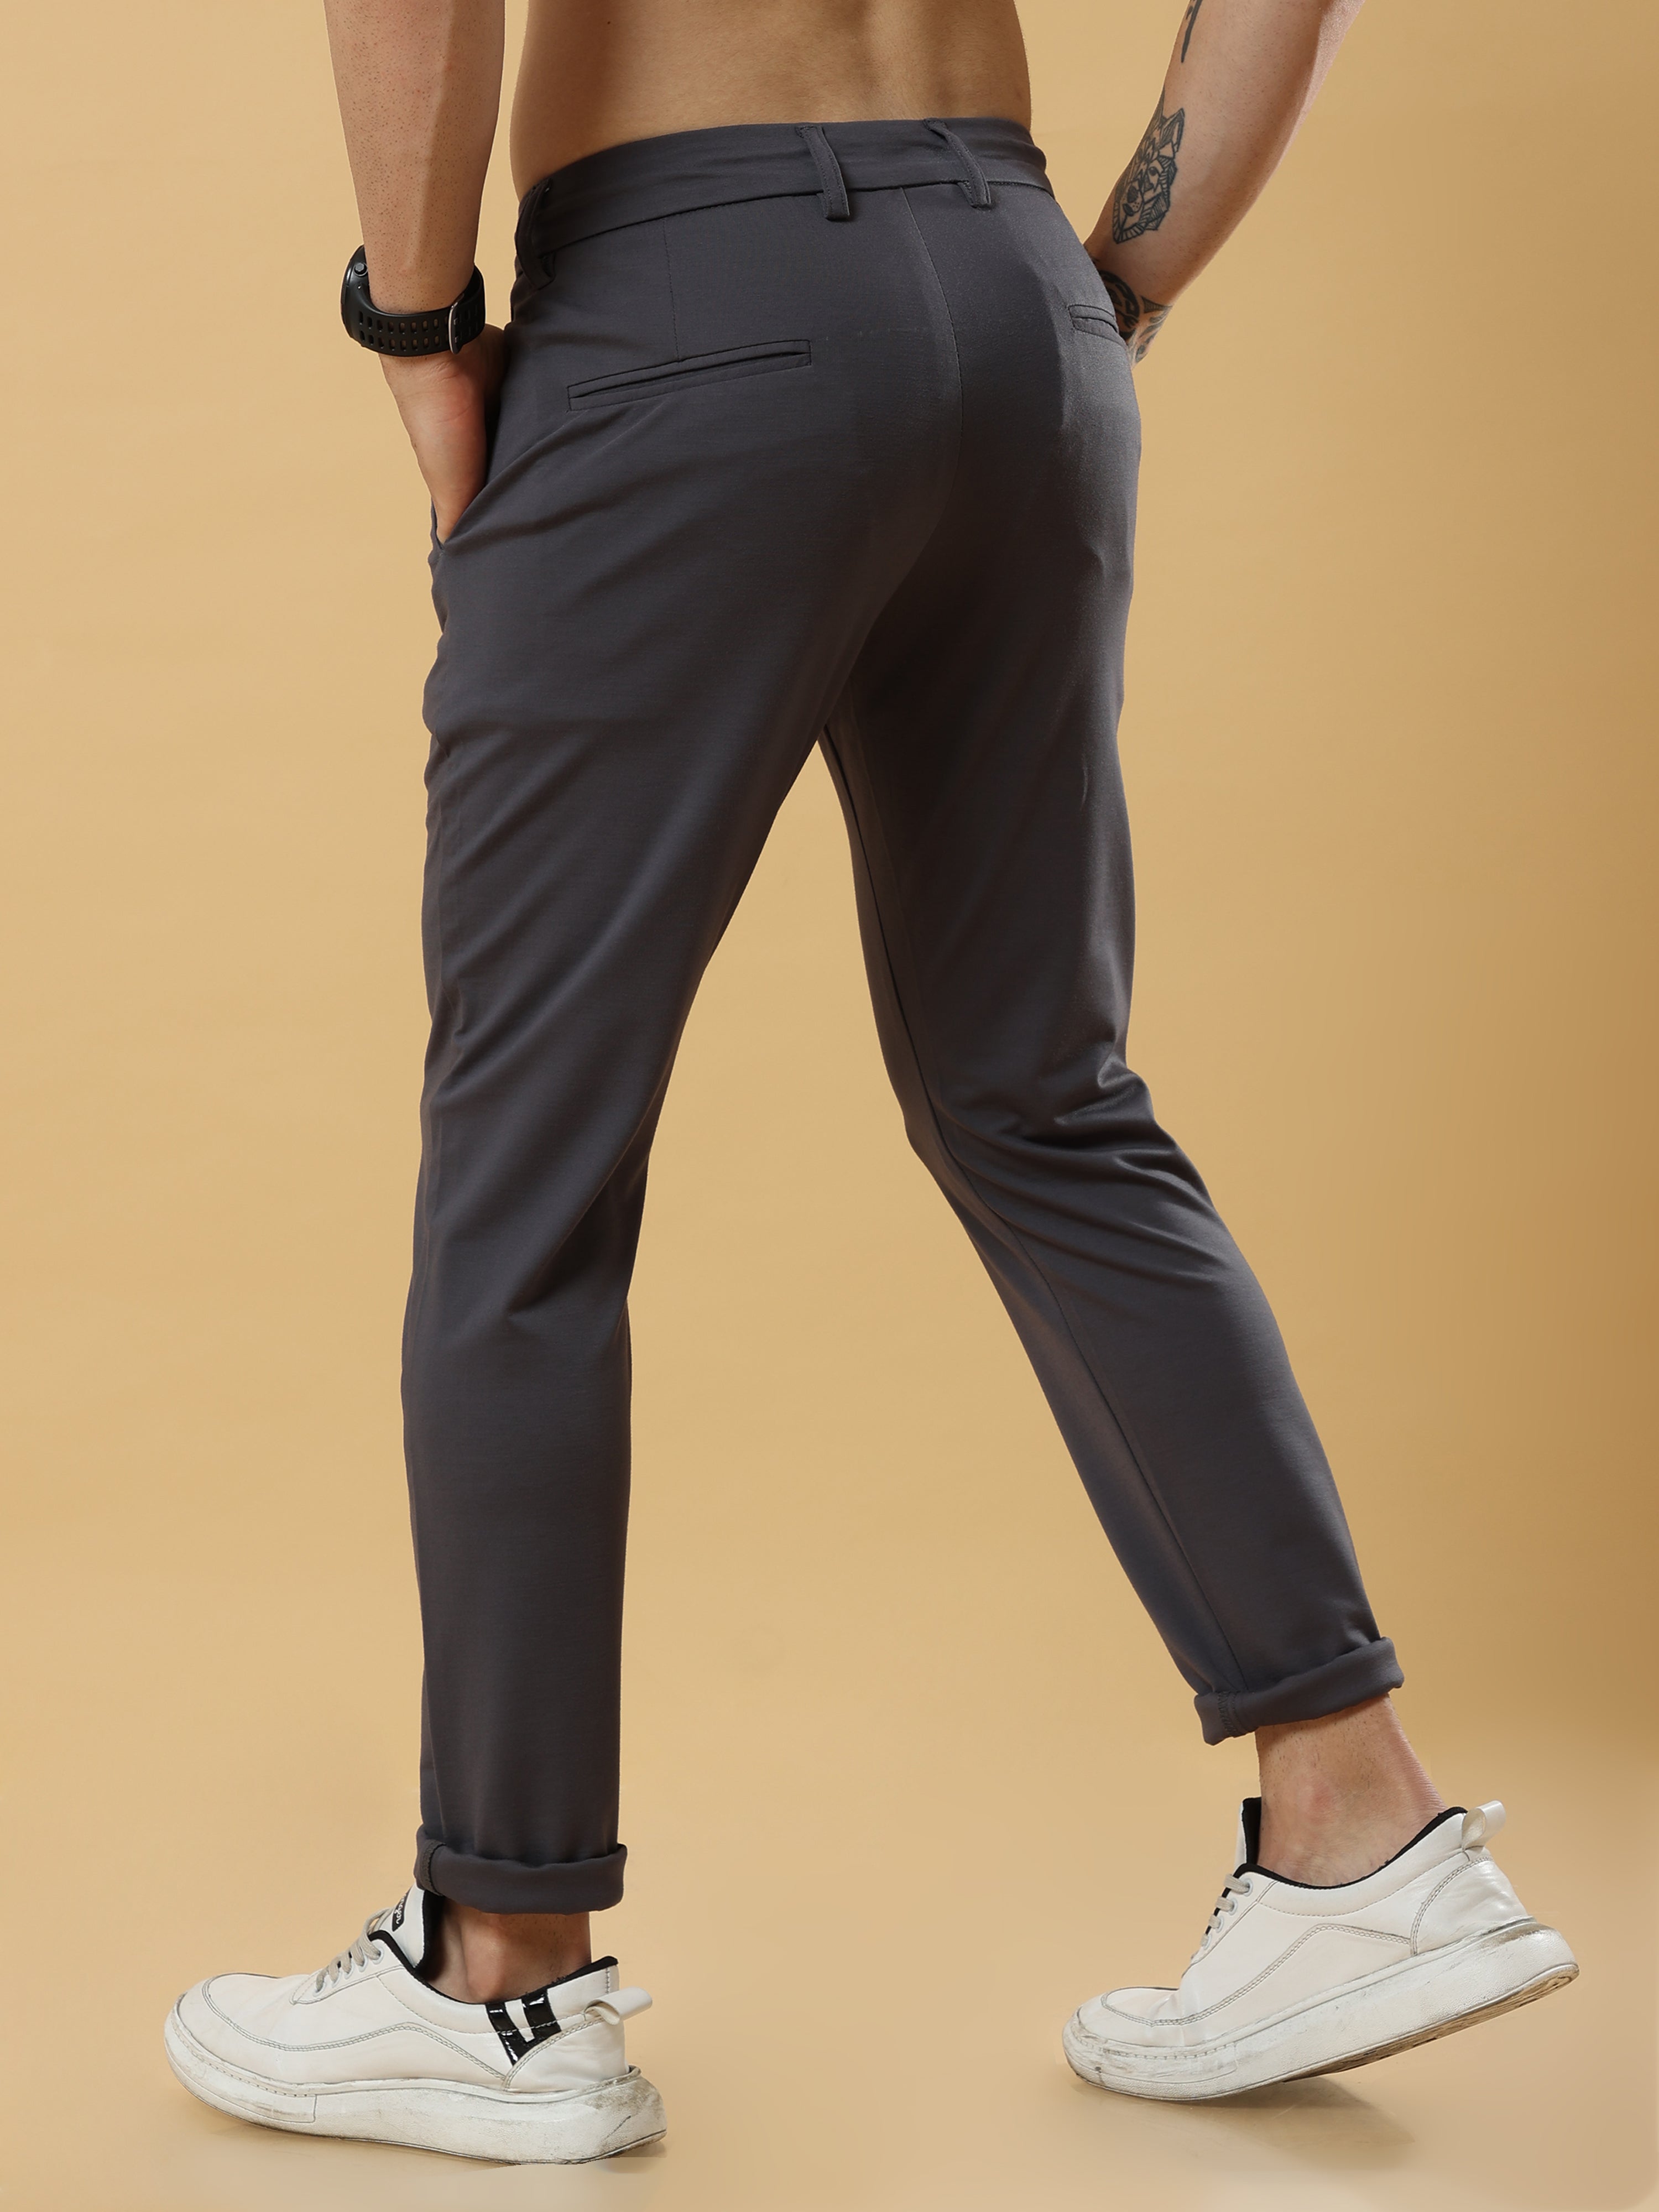 Grey Trousers For Men: 6 Outfits That Will Last You All Week | FashionBeans